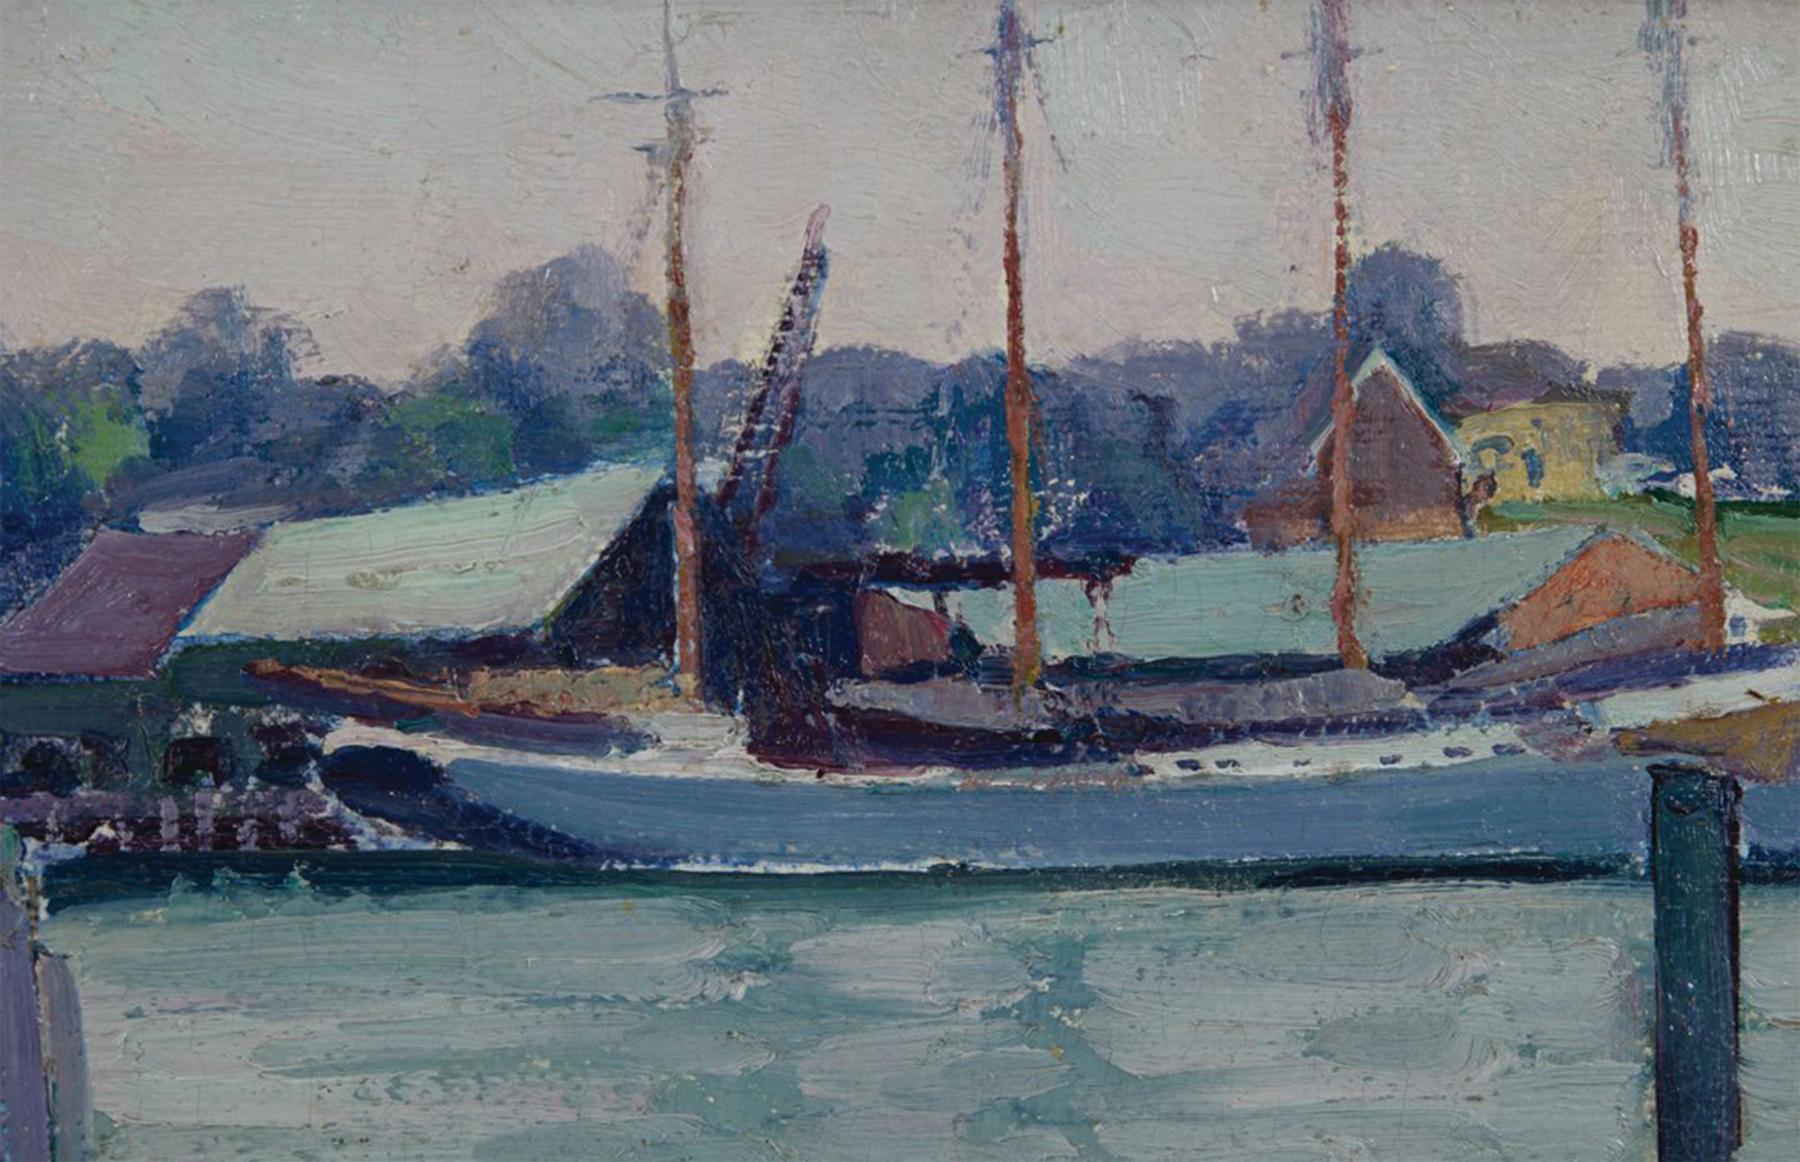 George Gustav Adomeit (American, 1879-1967)
Boothbay Harbor, 1924
Oil on canvas
Signed lower right
15 x 17 inches
20.25 x 22.25 inches, framed

A major painter of American scene subjects, George Adomeit was born in Memel, Germany, and came to